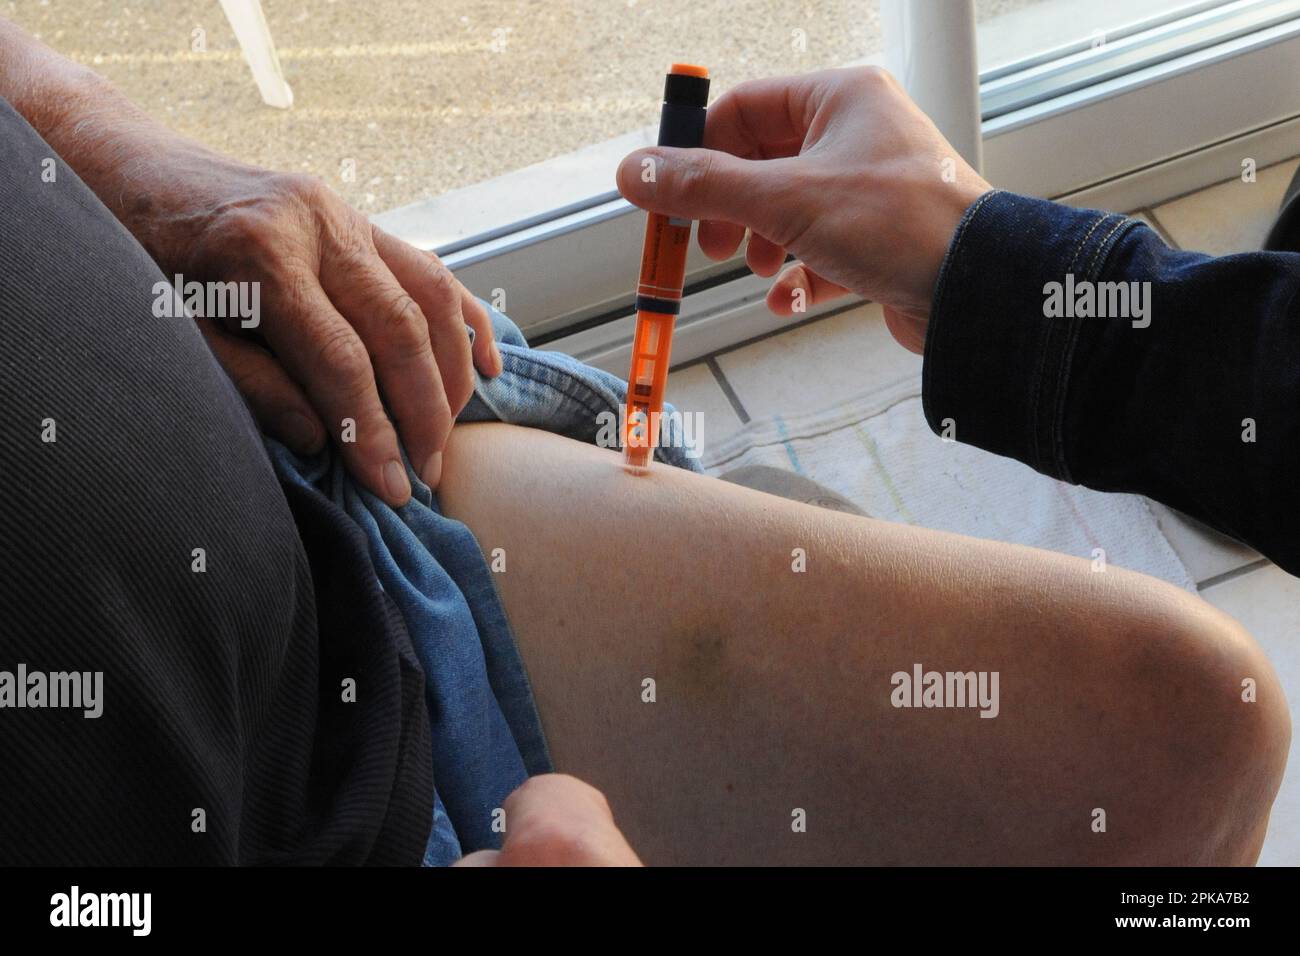 Liberal campaign nurse at the home of a diabetic patient for blood sugar testing by transdermal patch scan and slow insulin injection. Stock Photo